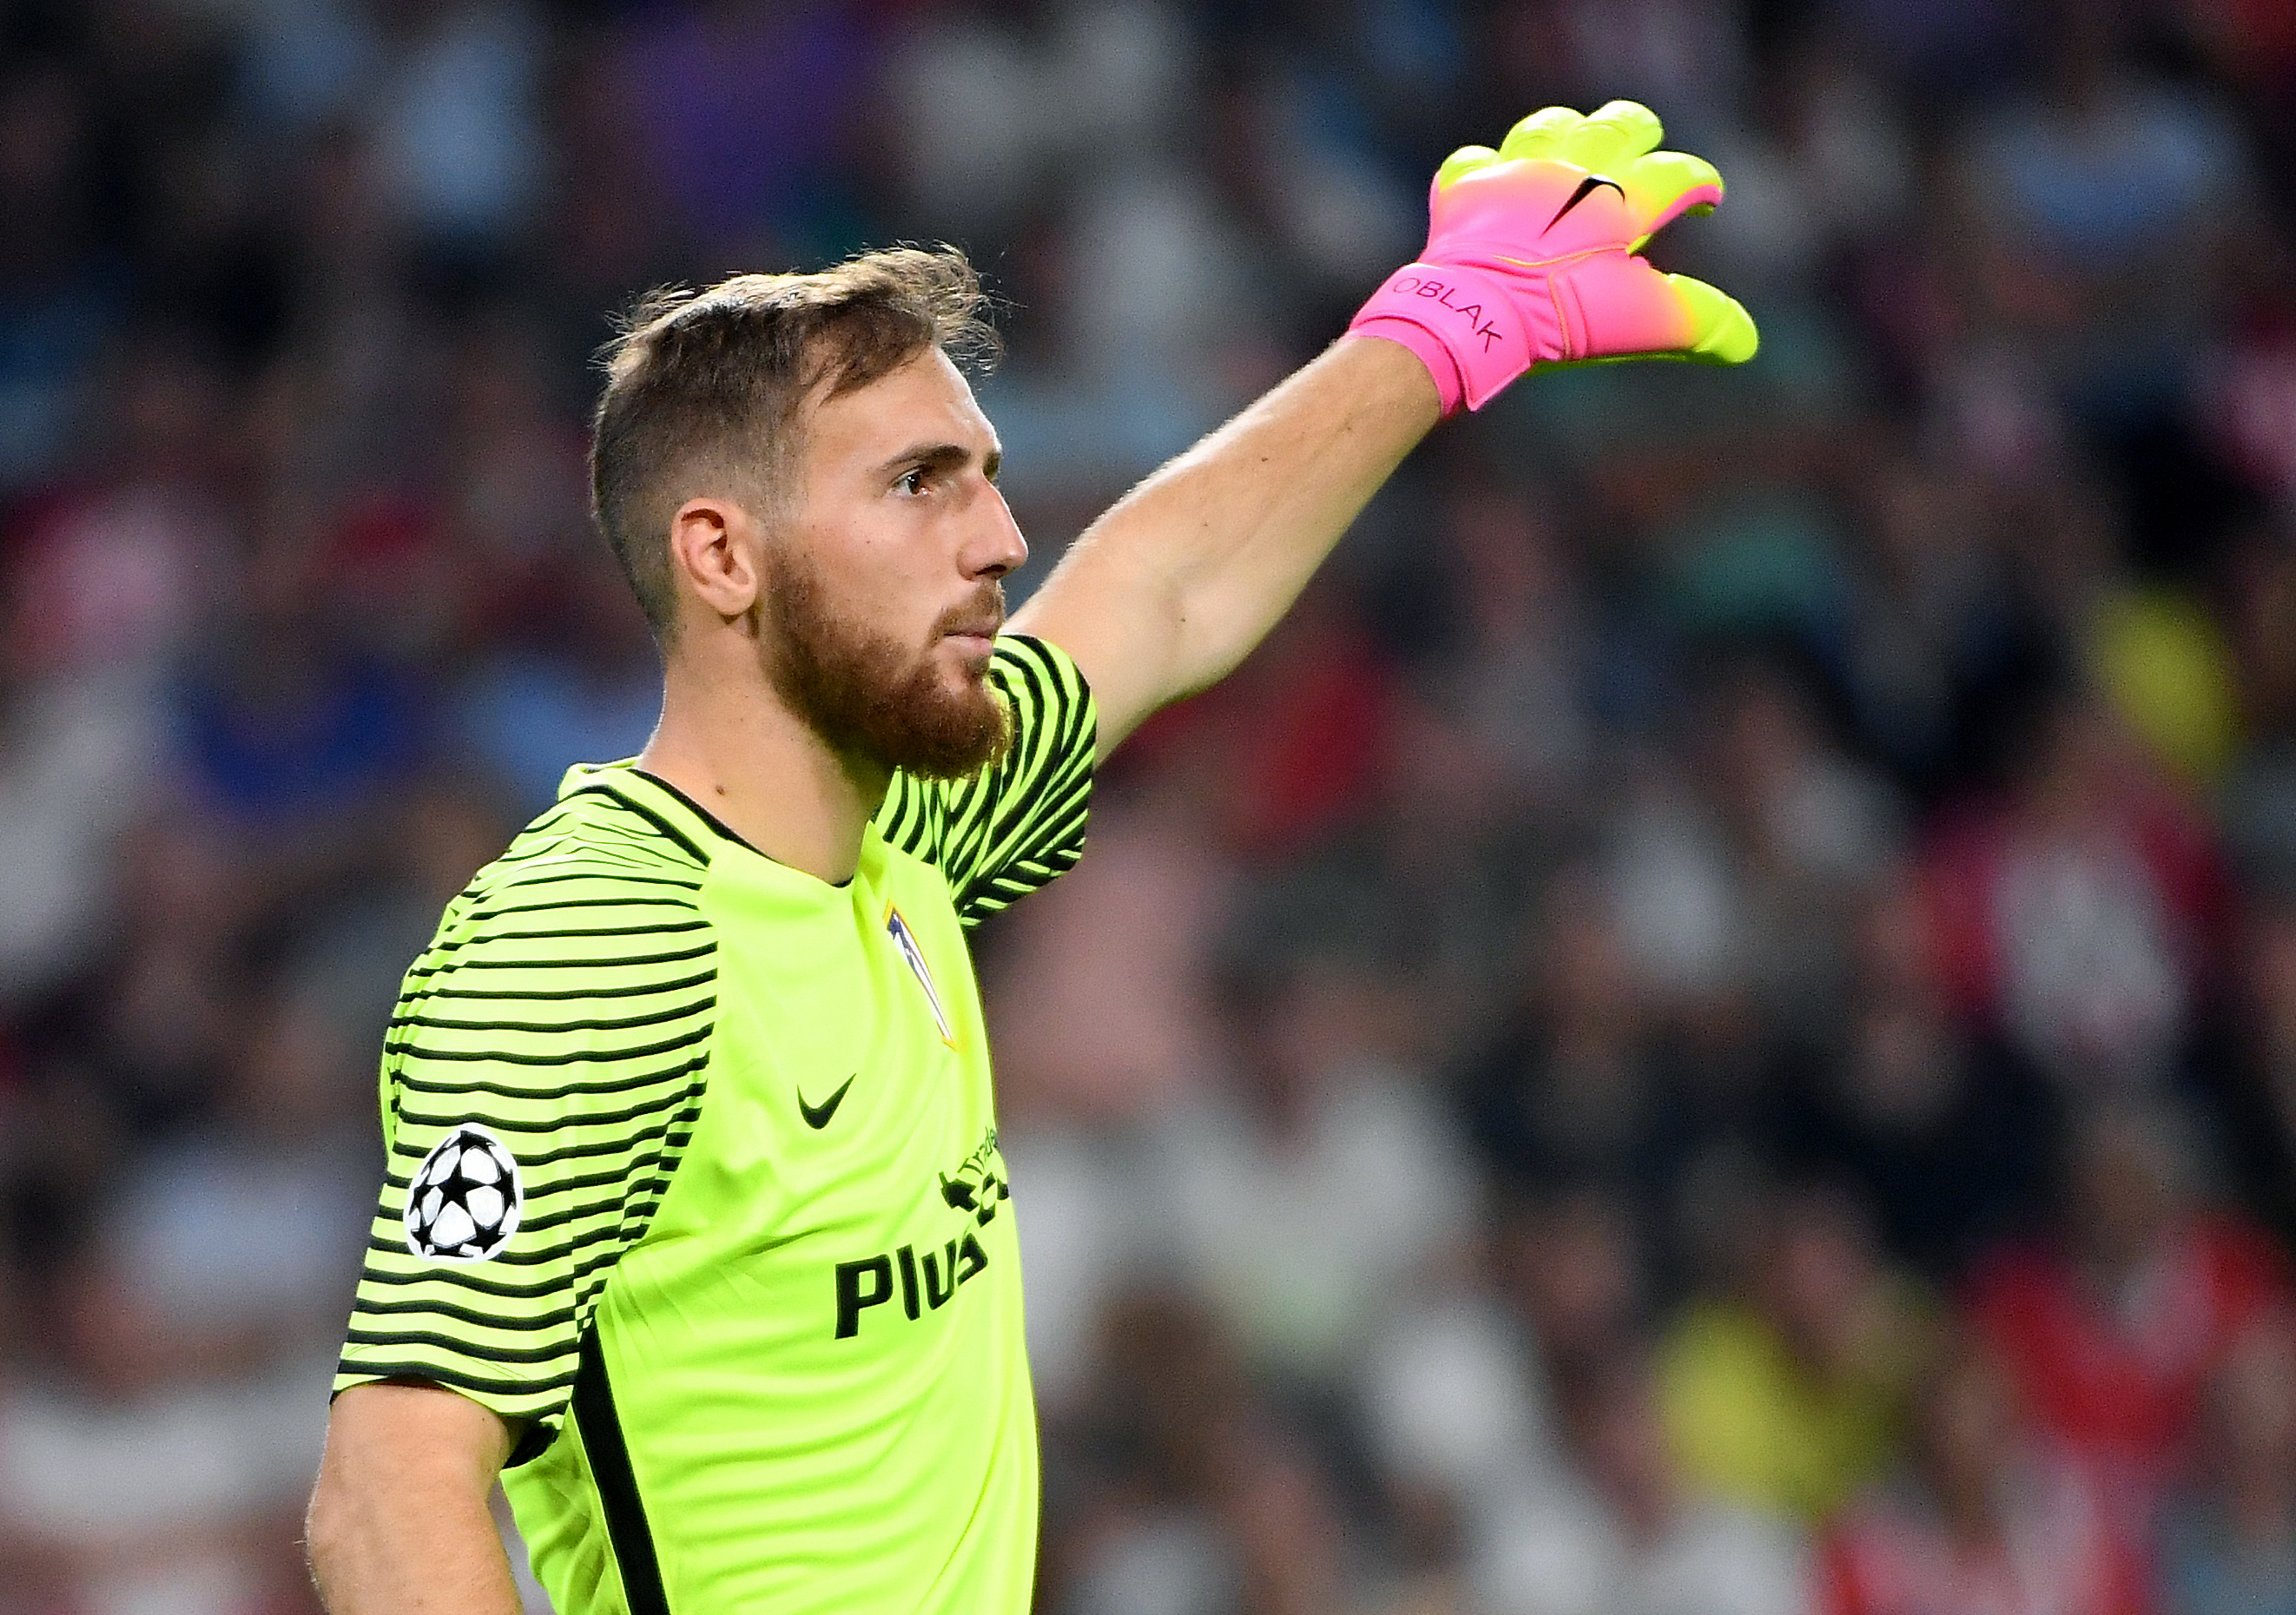 Atletico Madrid's Slovenian goalkeeper Jan Oblak gestures during the UEFA Champions League football match between PSV Eindhoven and Atletico Madrid at Philips Stadium on September 13, 2016, in Eindhoven, The Netherlands. / AFP / EMMANUEL DUNAND        (Photo credit should read EMMANUEL DUNAND/AFP/Getty Images)